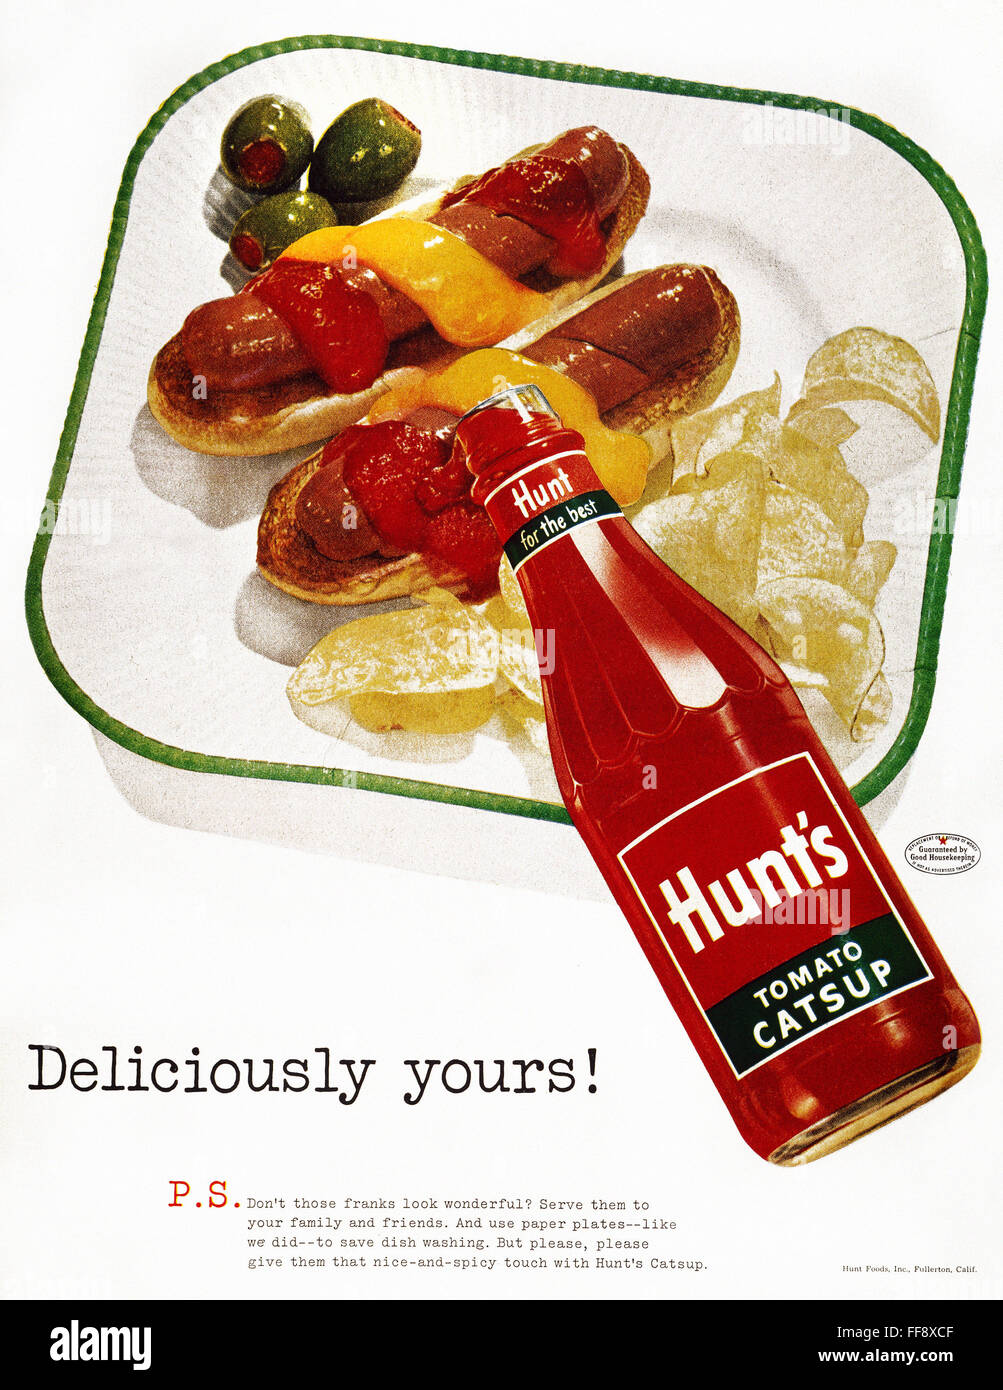 KETCHUP AD, 1955. /n'Deliciously Yours! P.S. Don't Those Franks Look Wonderful?' Advertisement for Hunt's Tomato Catsup, from an American magazine of 1955. Stock Photo